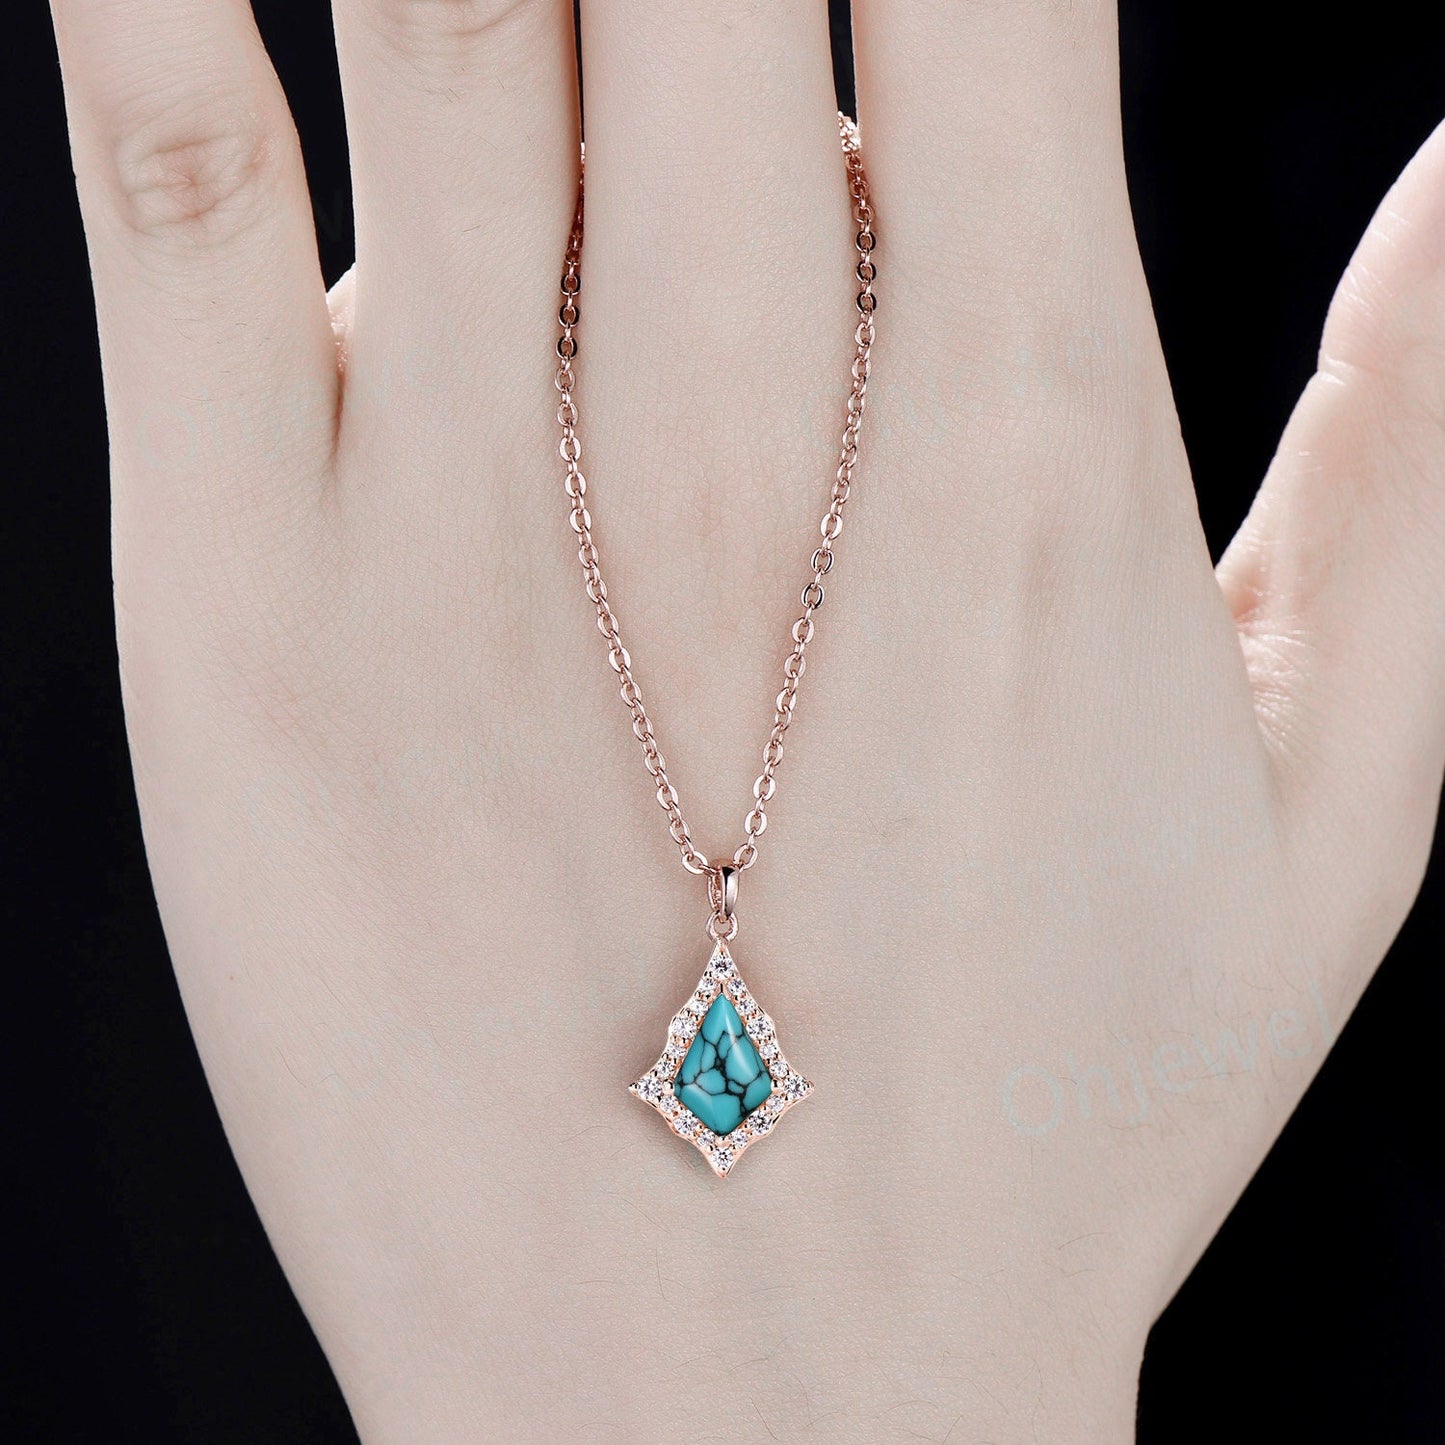 Vintage kite natural turquoise necklace 14k rose gold antique unique snowdrift halo diamond necklace Pendant women jewelry anniversary gift